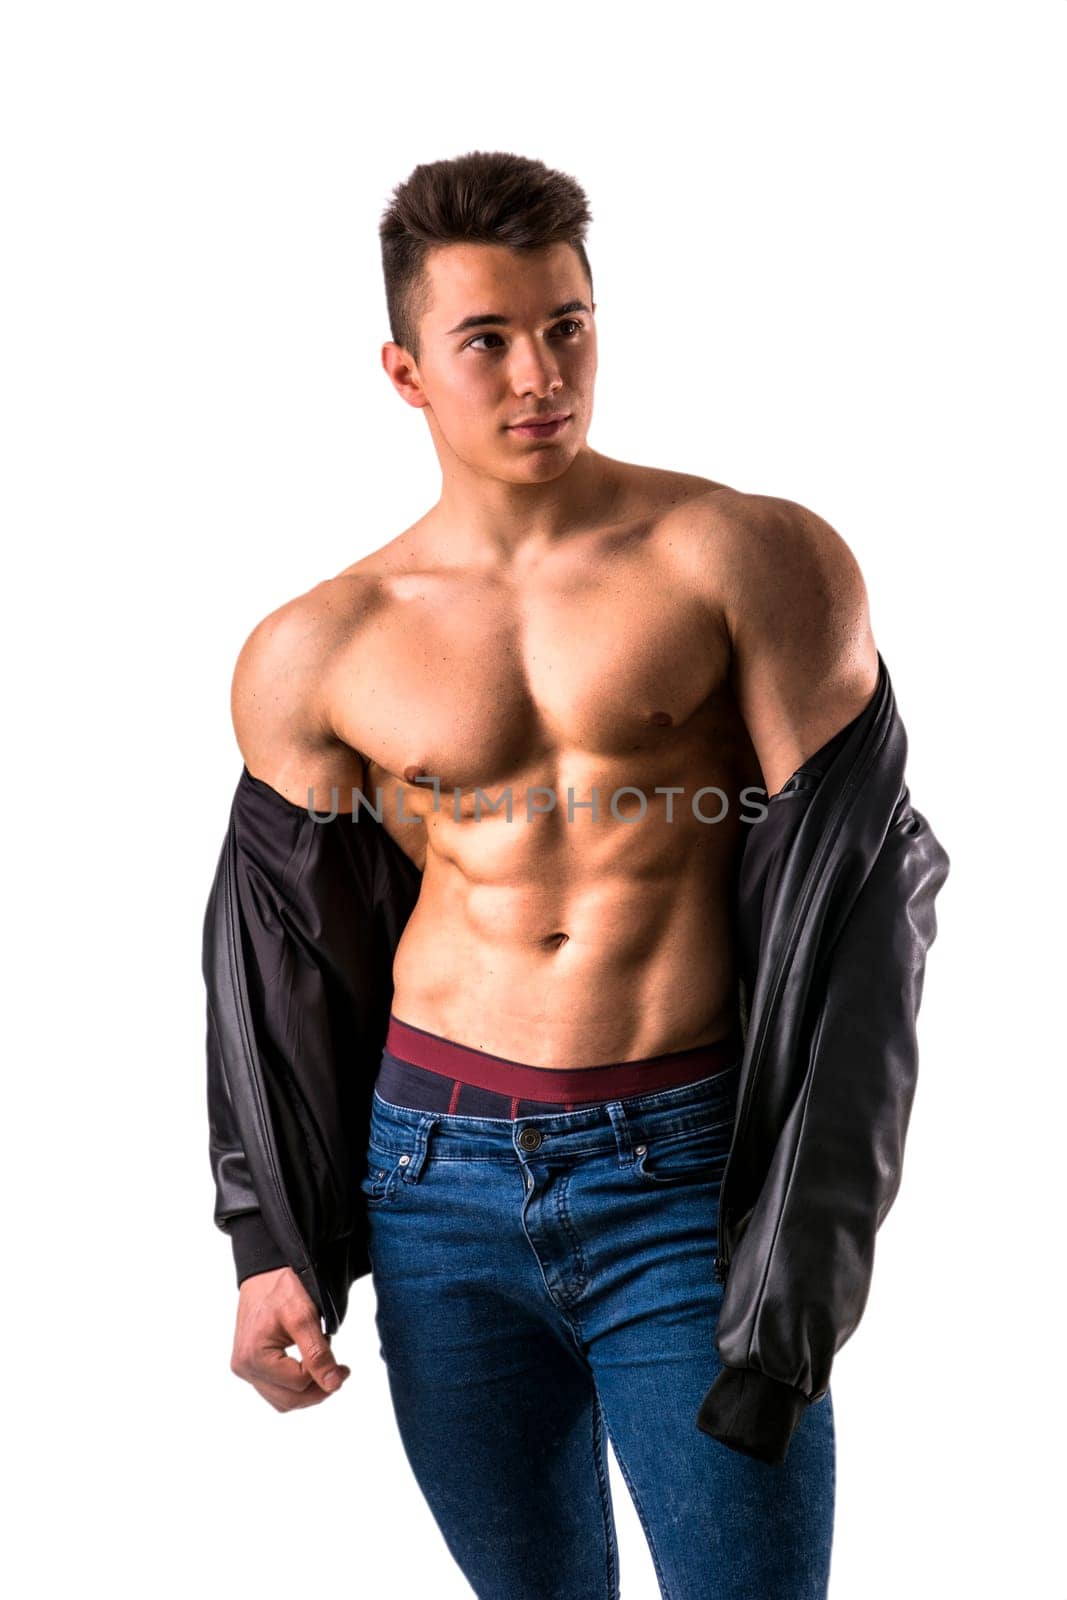 Handsome young muscular man shirtless wearing jeans, taking off leather jacket on naked muscle torso, isolated on white background in studio shot